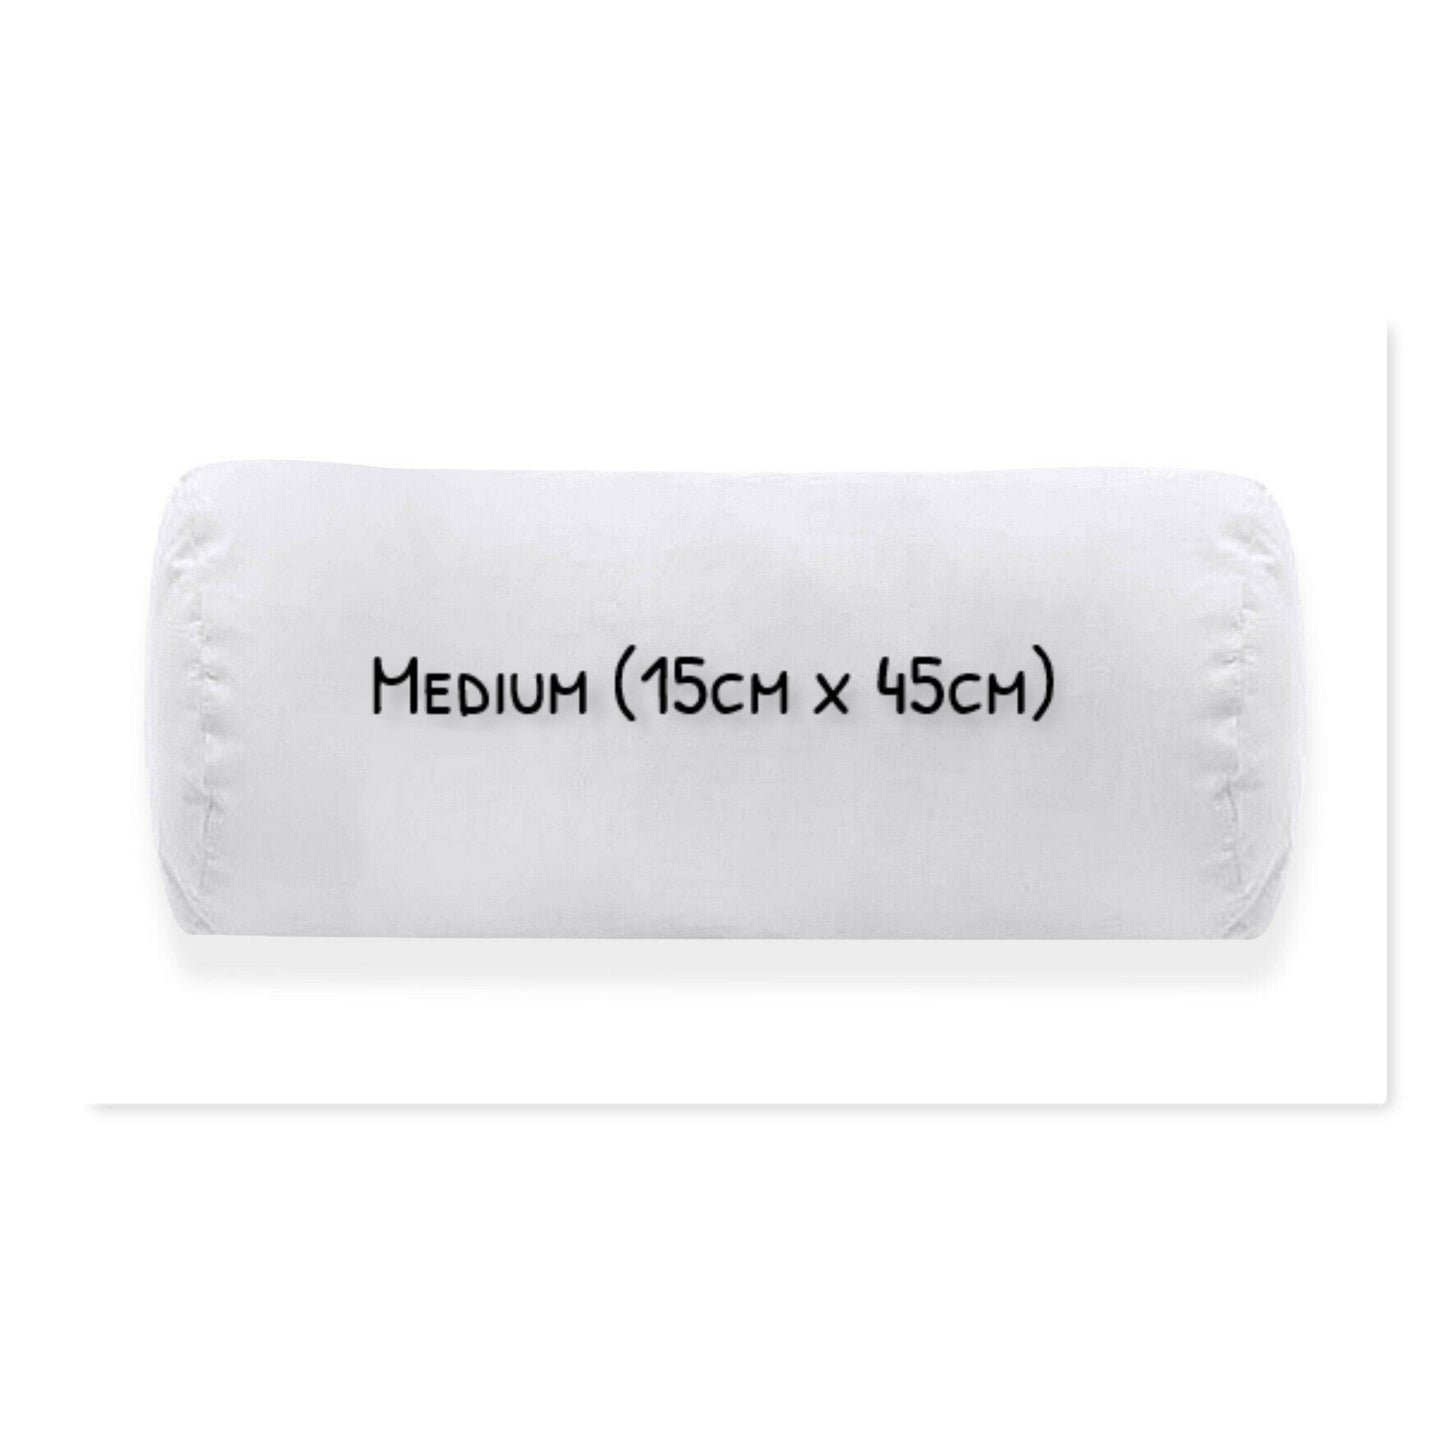 Round Shaped Bolster Pillow White Cushion Long Body Support Orthopaedic Pillow - Arlinens